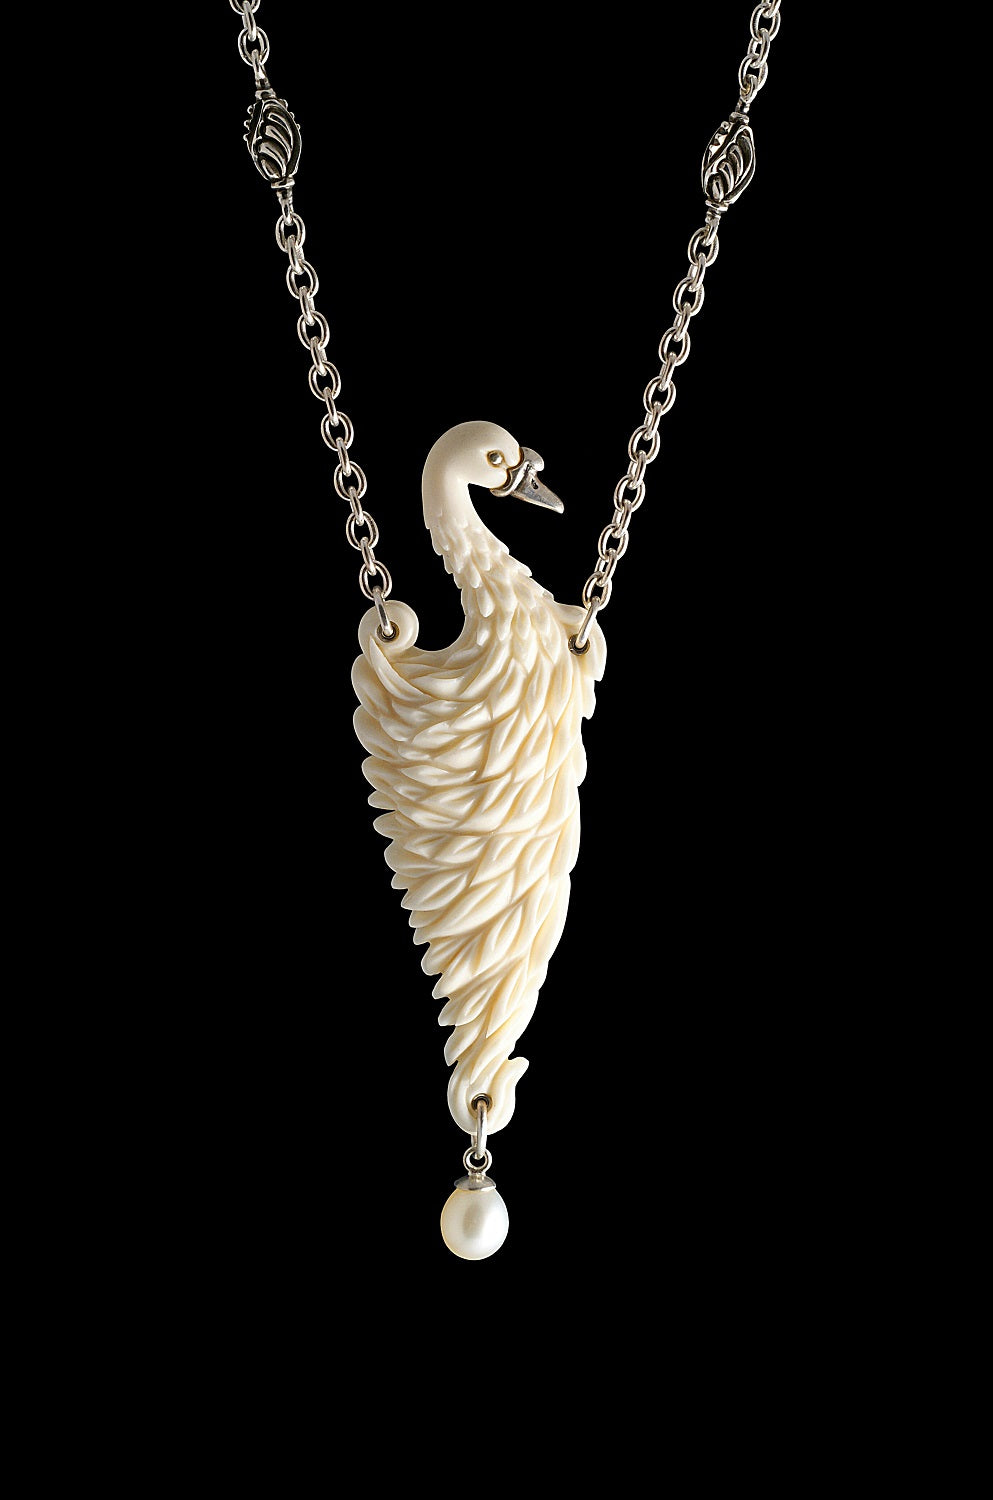 White Swan Necklace